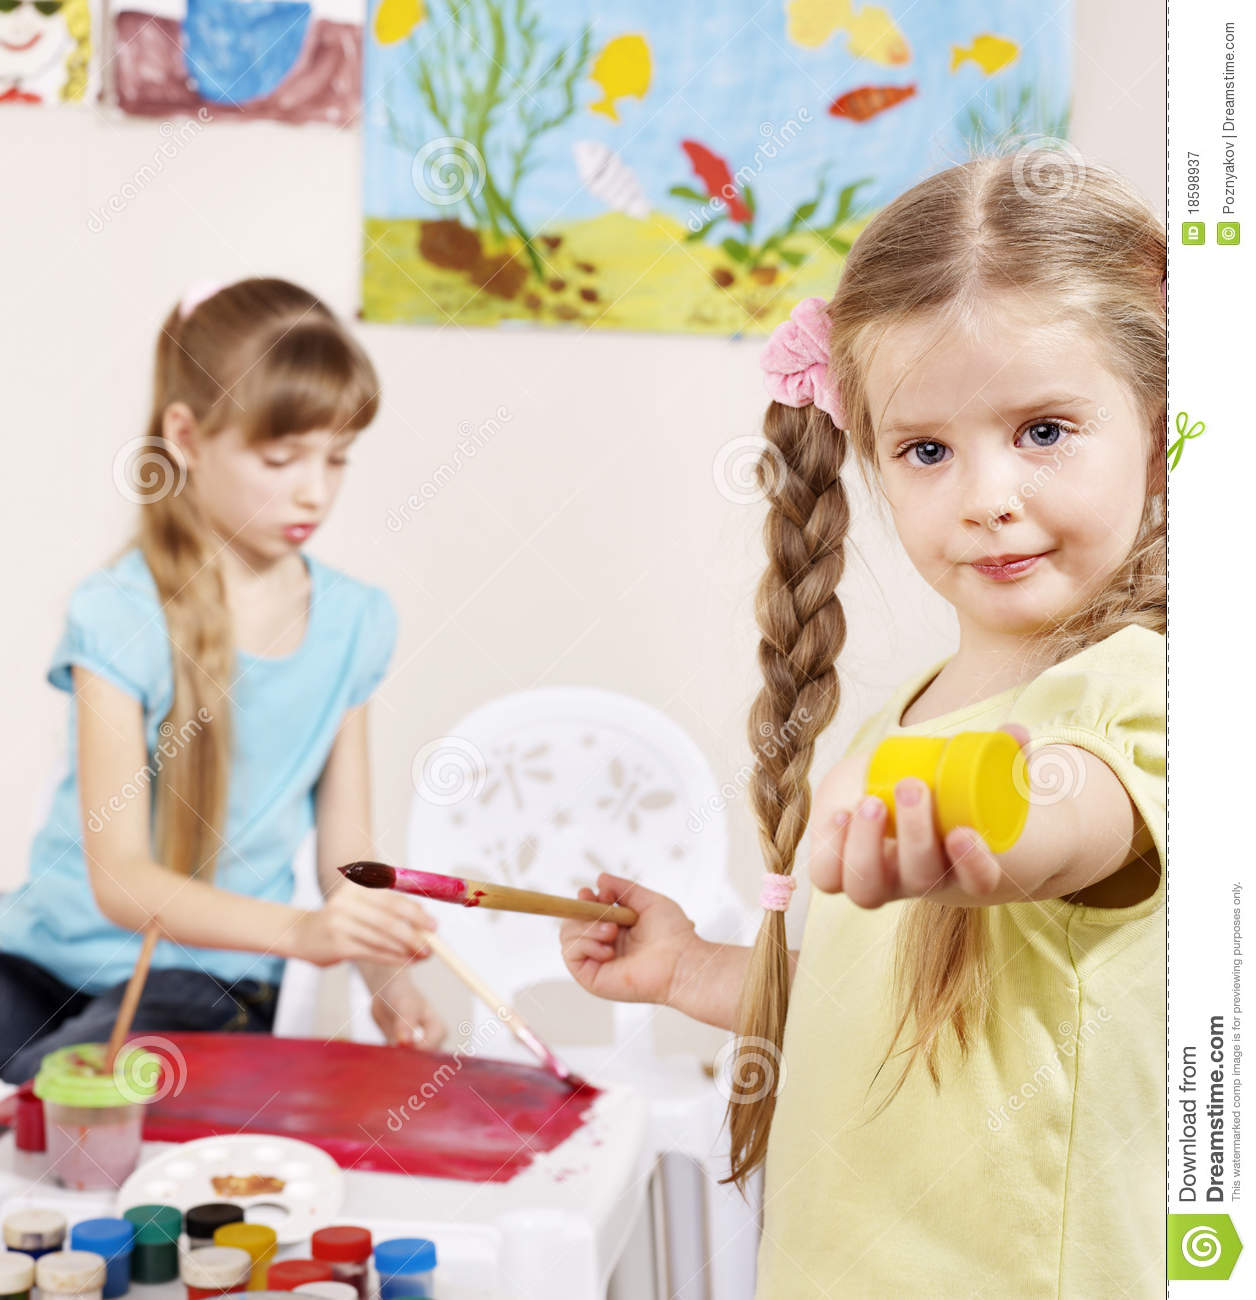 Children Painting In Preschool  Royalty Free Stock Photography   Image    